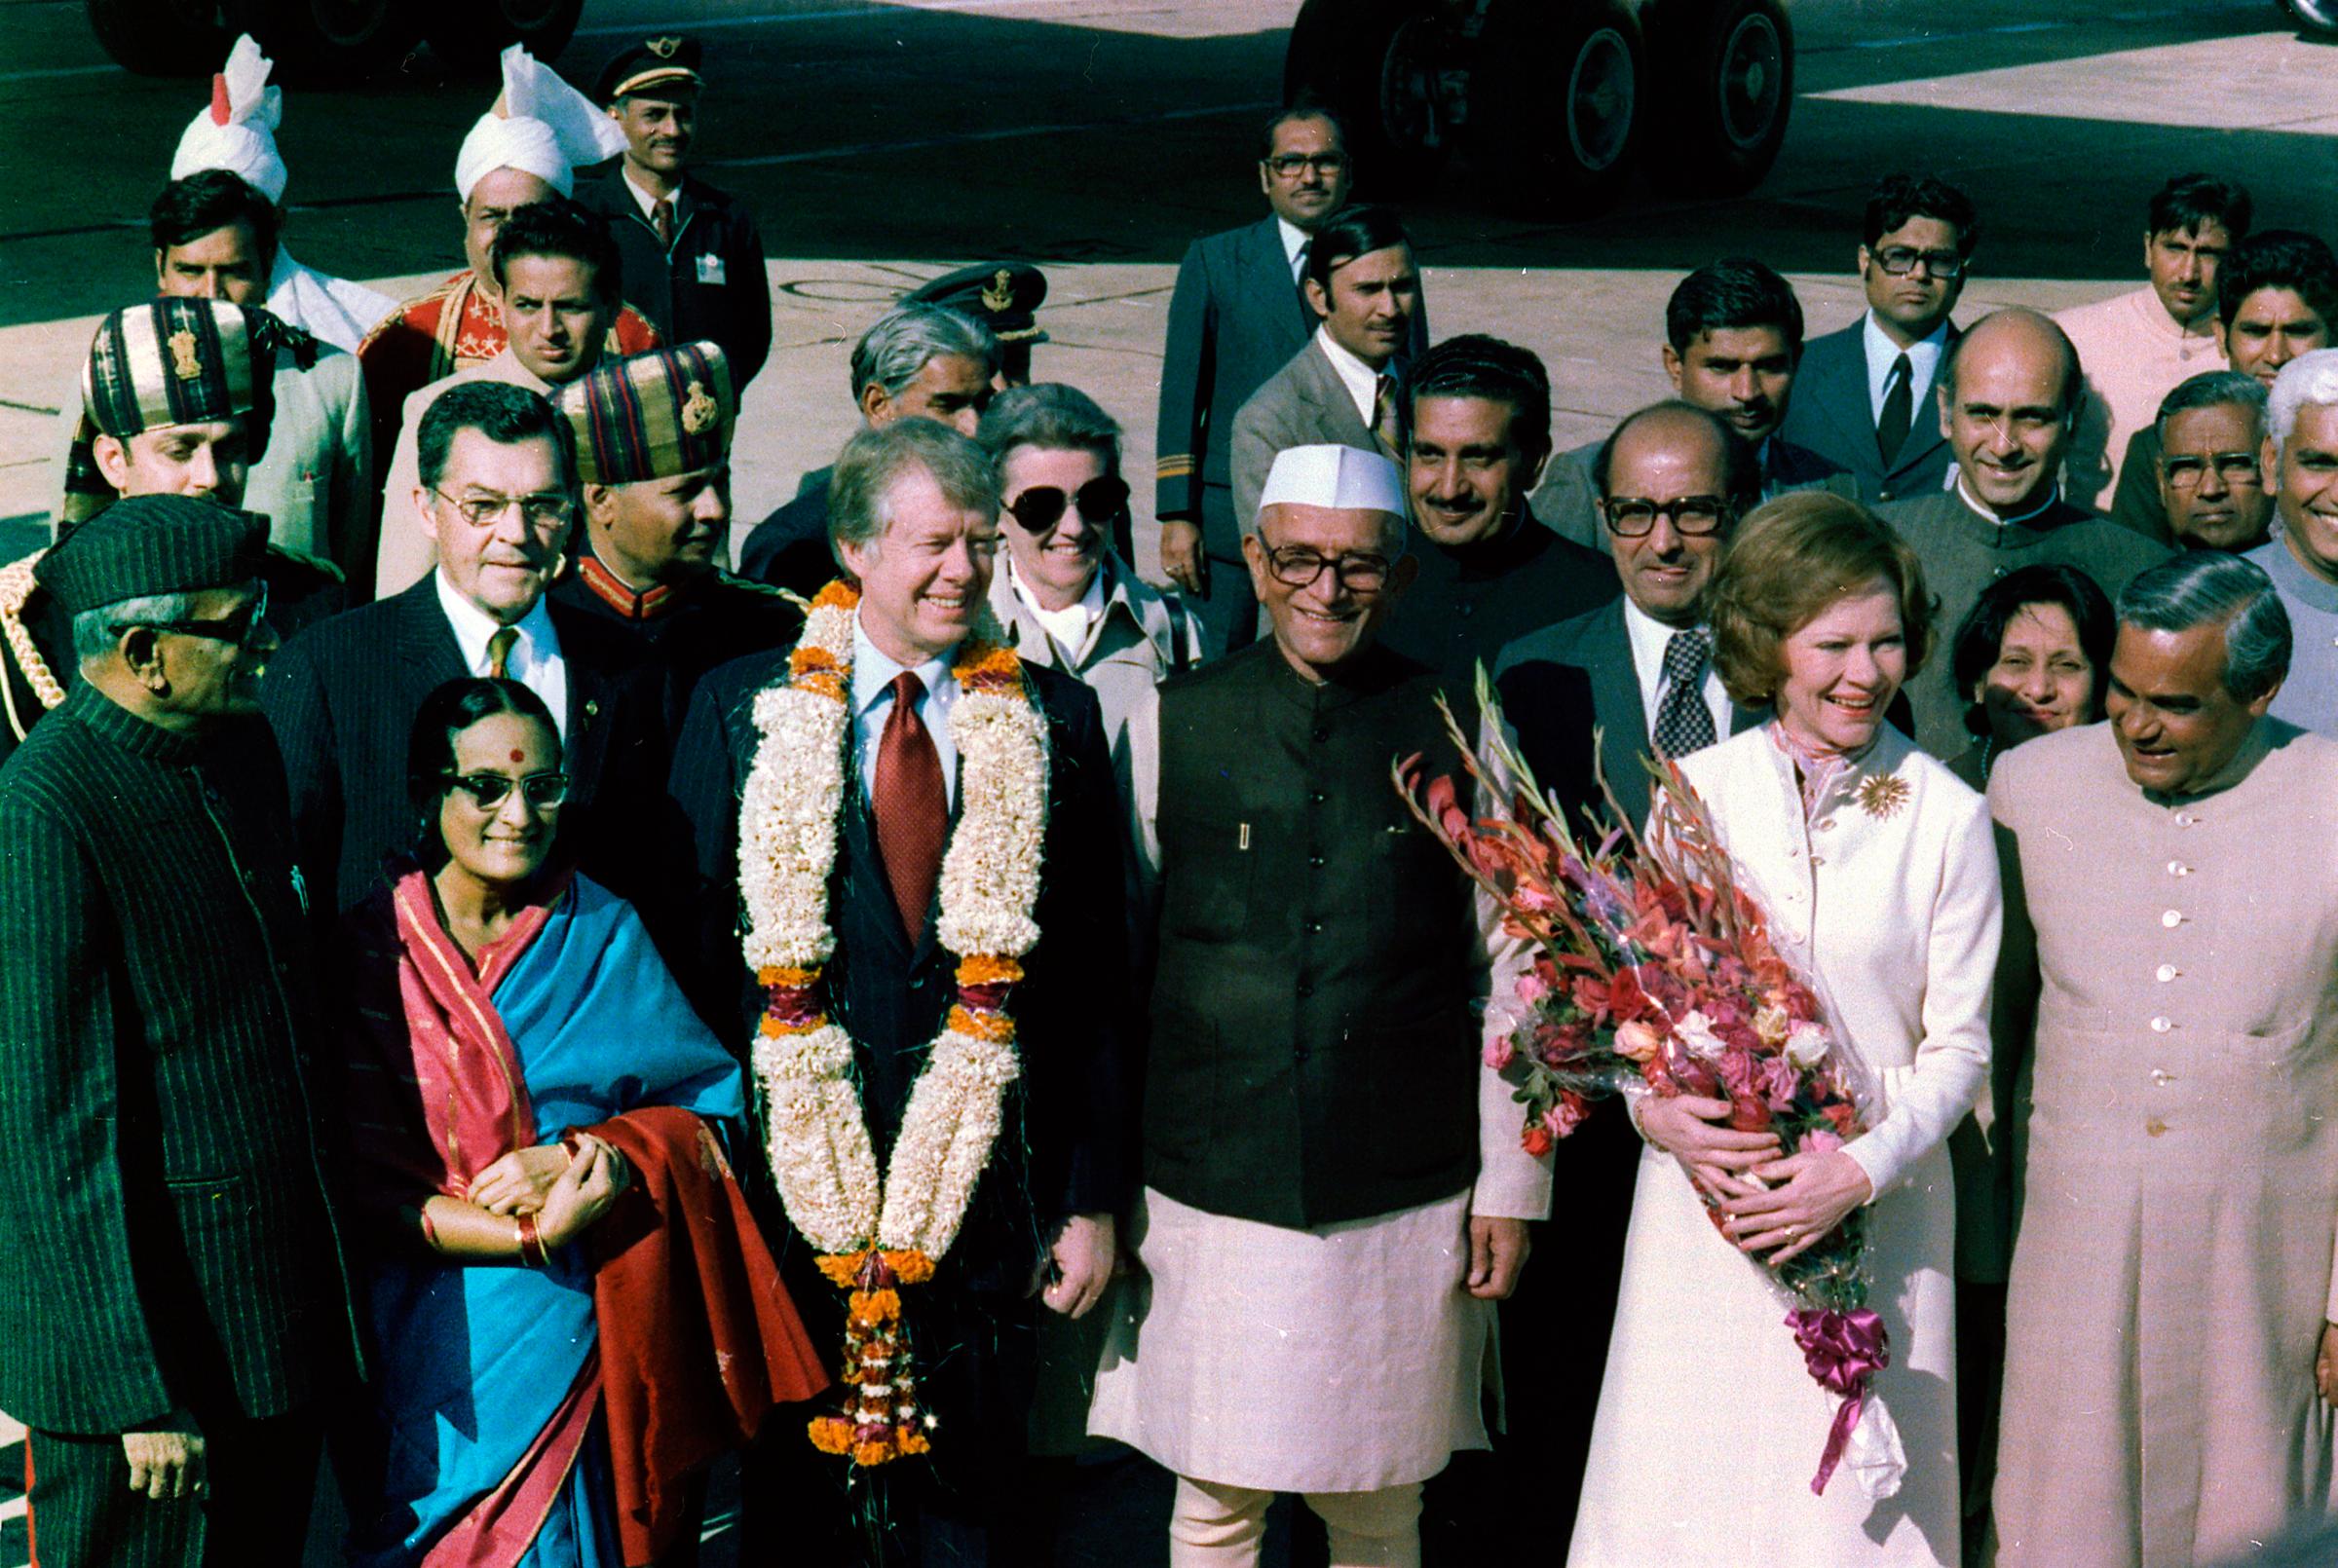 January 1978 visit of US President Jimmy Carter to India.